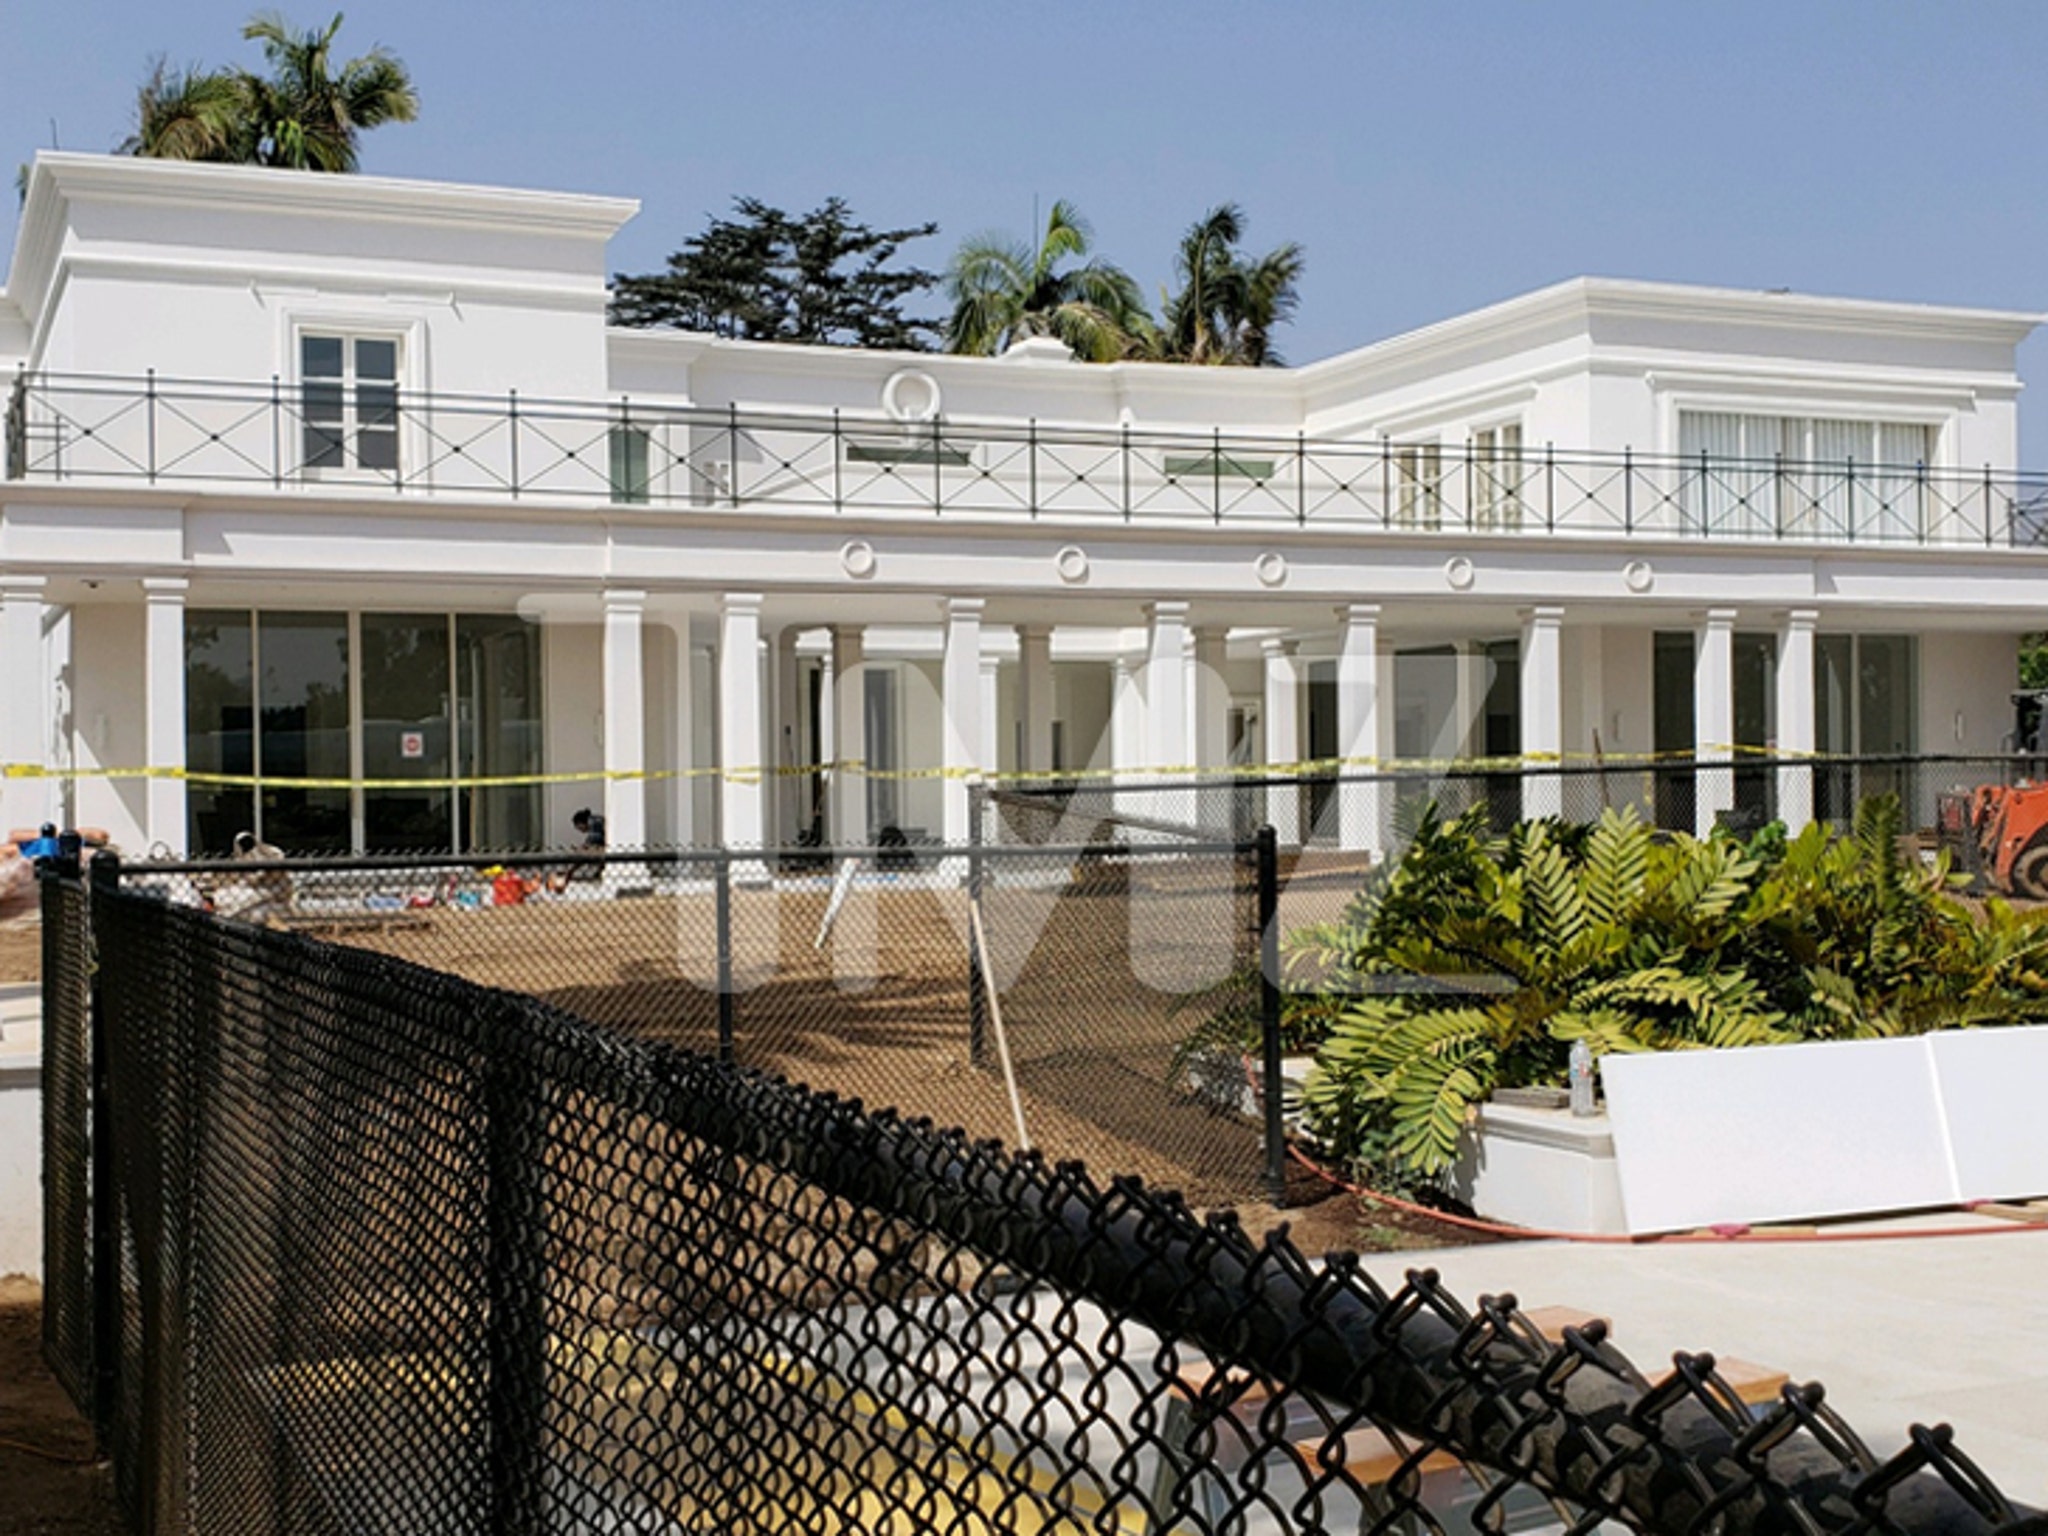 Tom Ford's Doing Major Renovations to $40 Million Compound